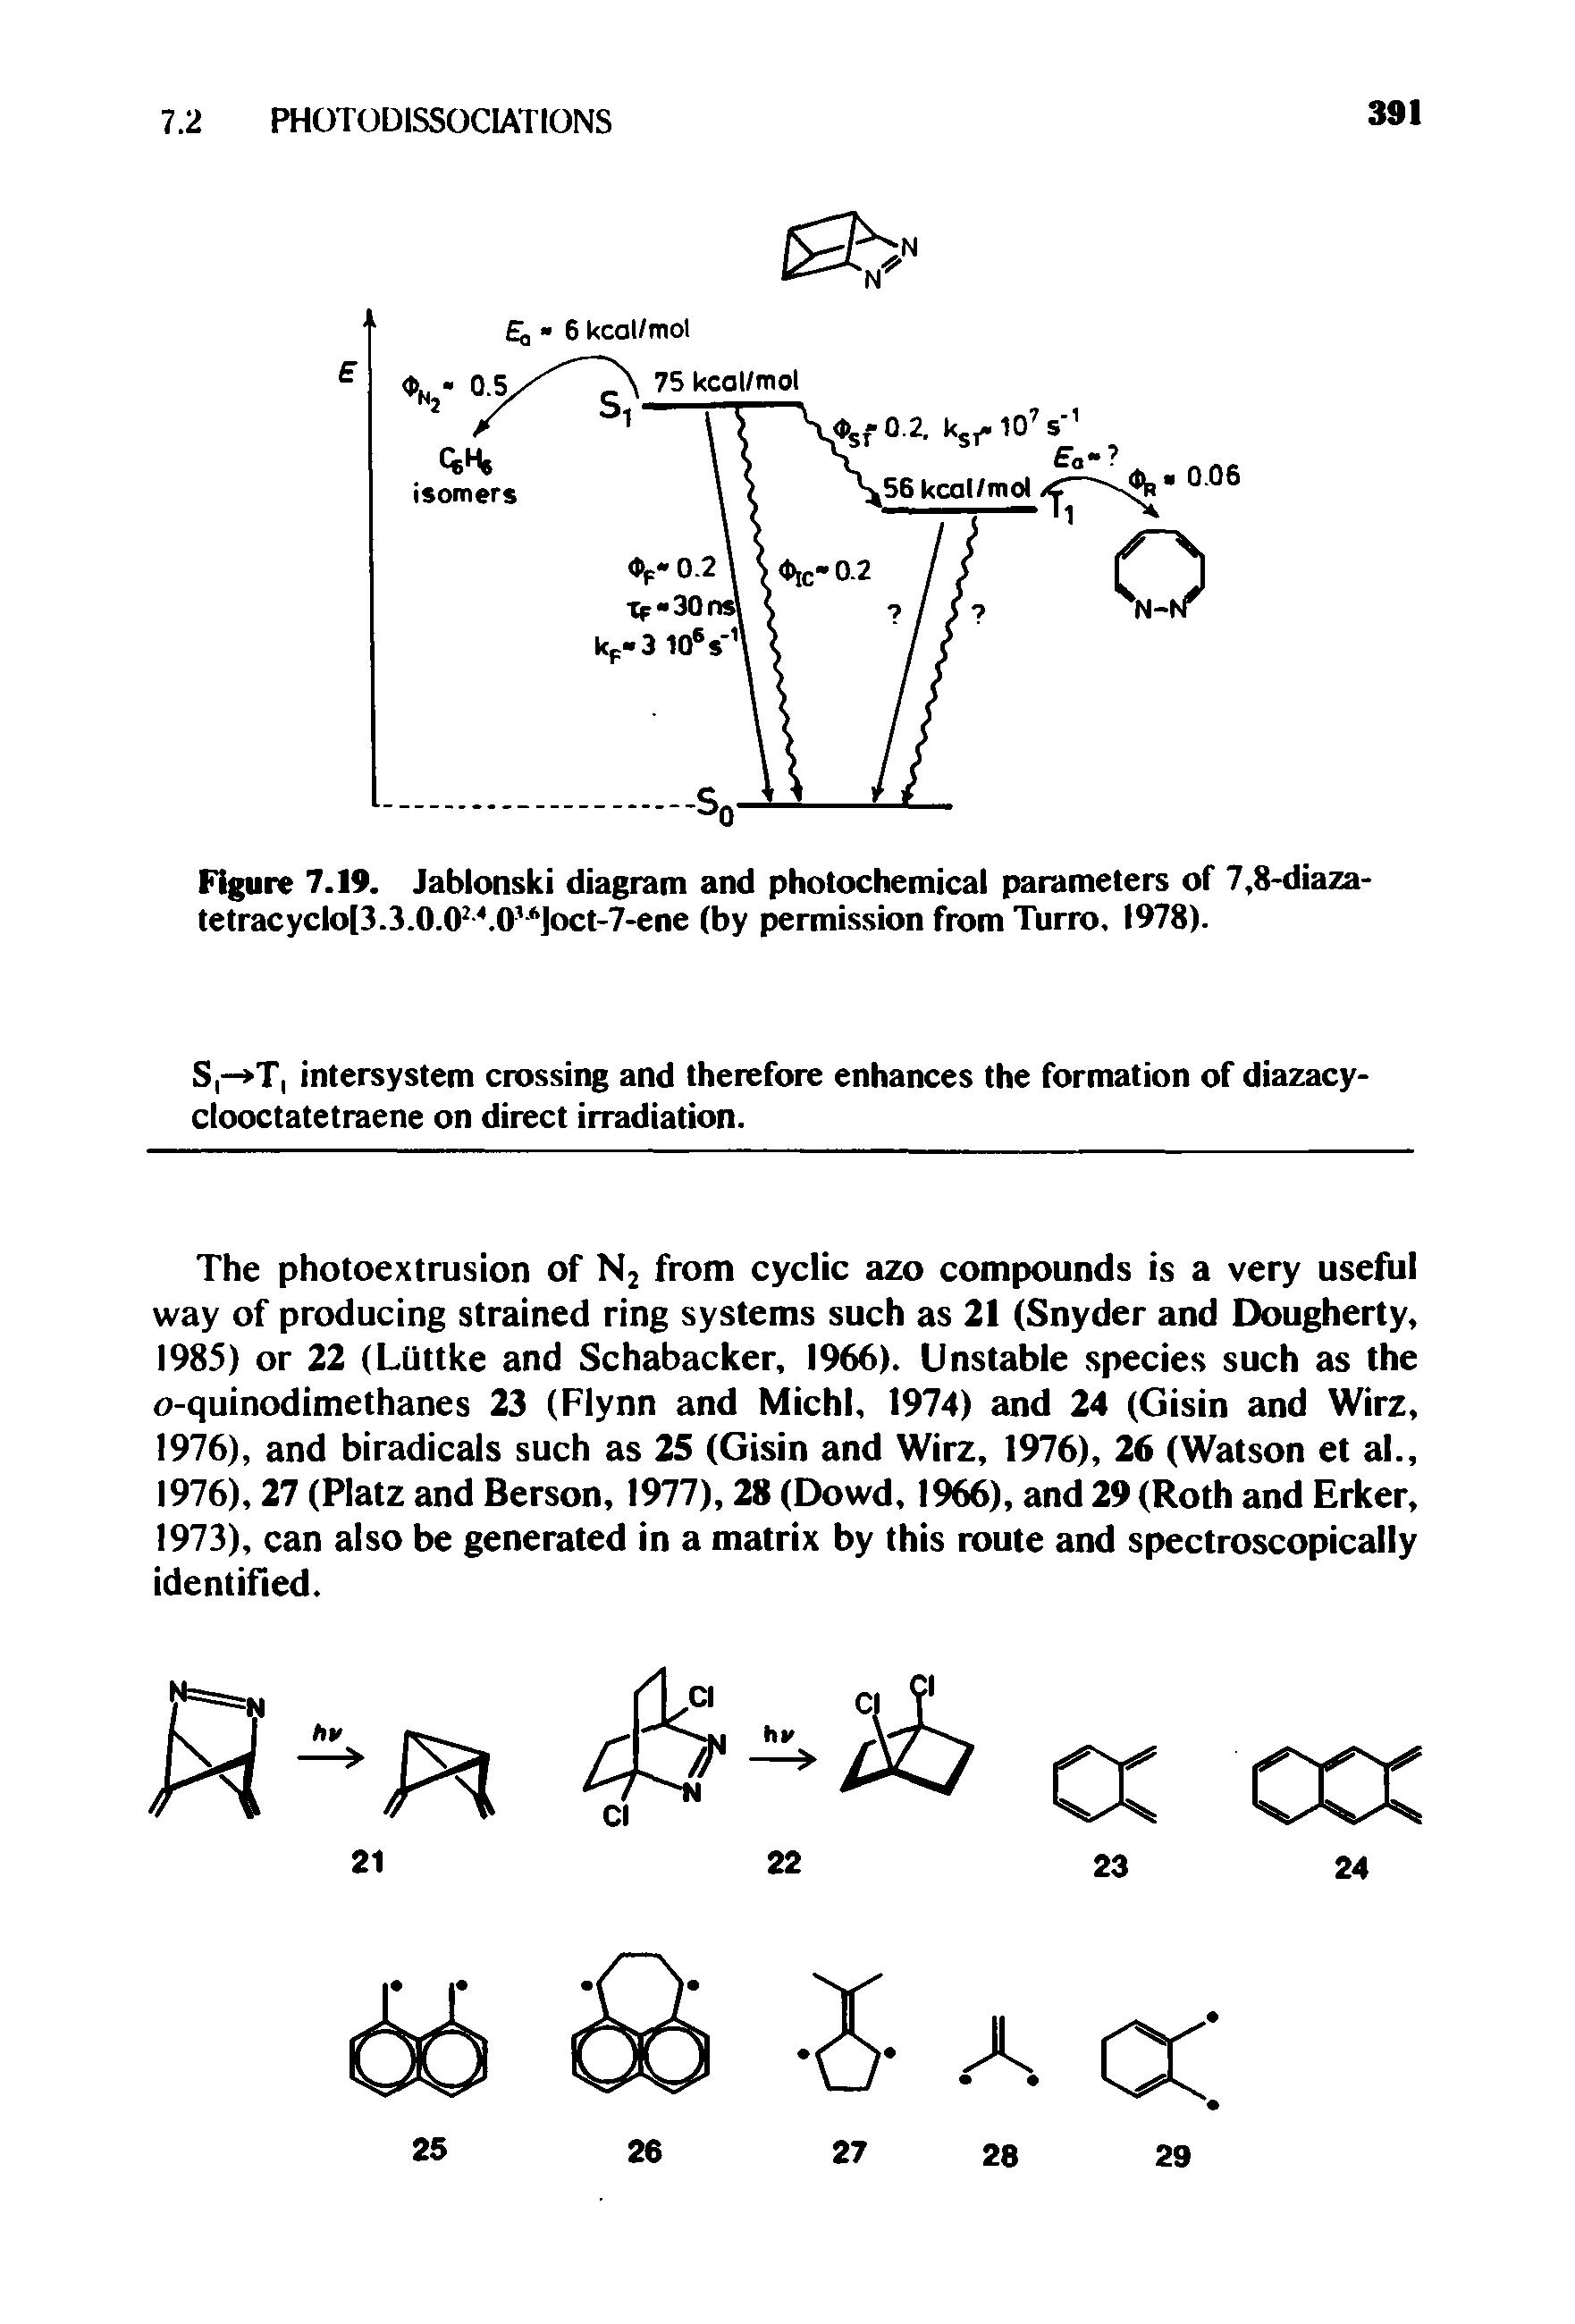 Figure 7.19. Jablonski diagram and photochemical parameters of 7,8-diaza-tetracyclo[3.3.0.0. O loct-T-ene (by permission from Turro. 1978).